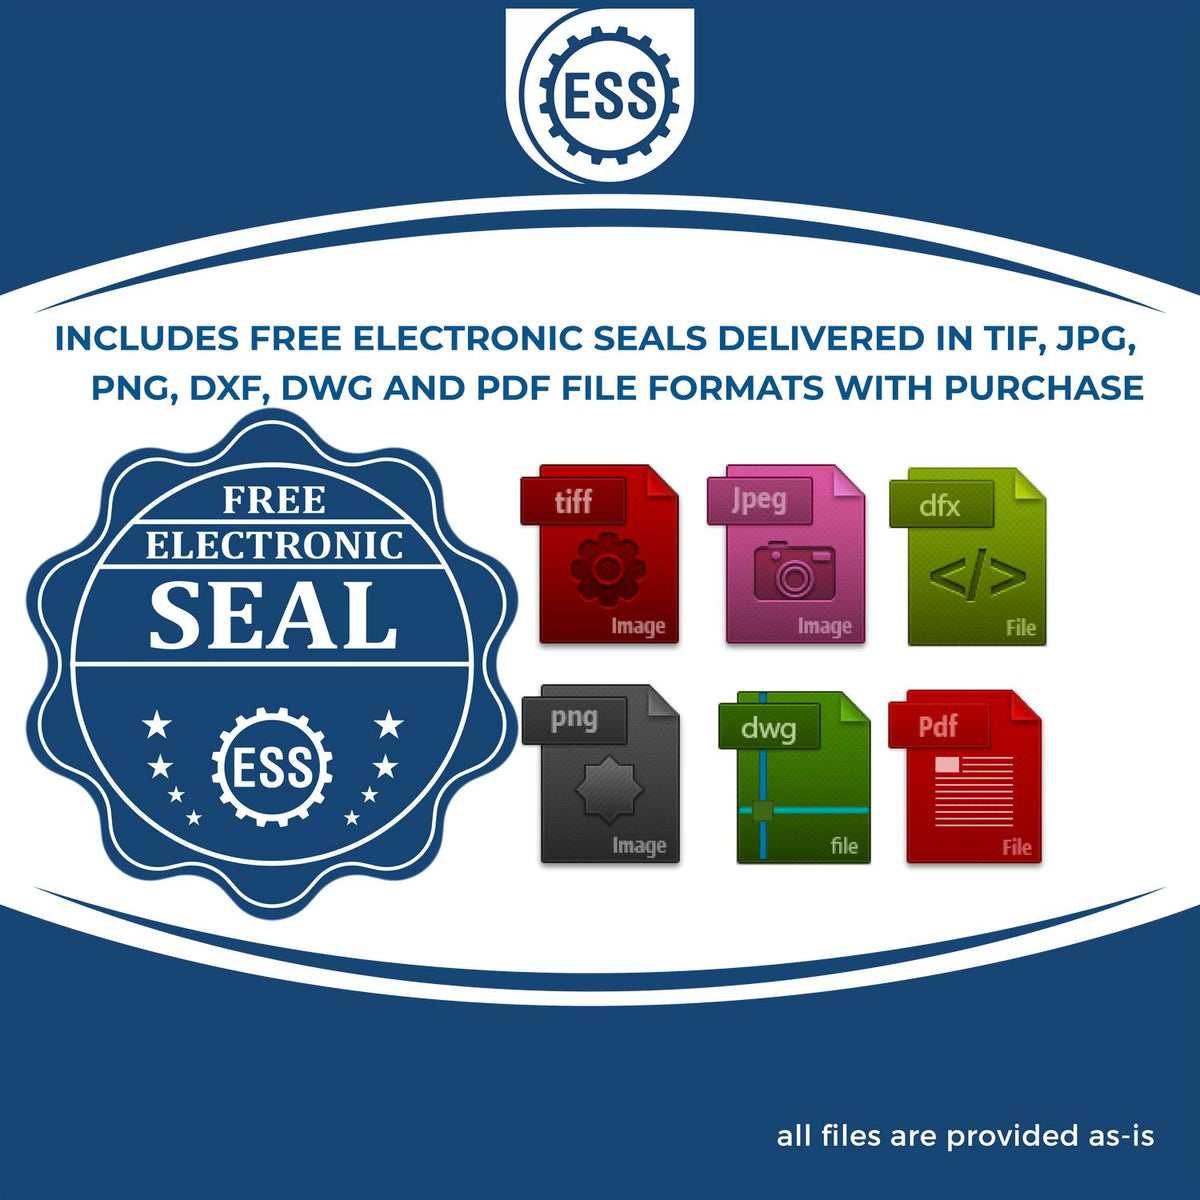 An infographic for the free electronic seal for the Soft Pocket Pennsylvania Landscape Architect Embosser illustrating the different file type icons such as DXF, DWG, TIF, JPG and PNG.